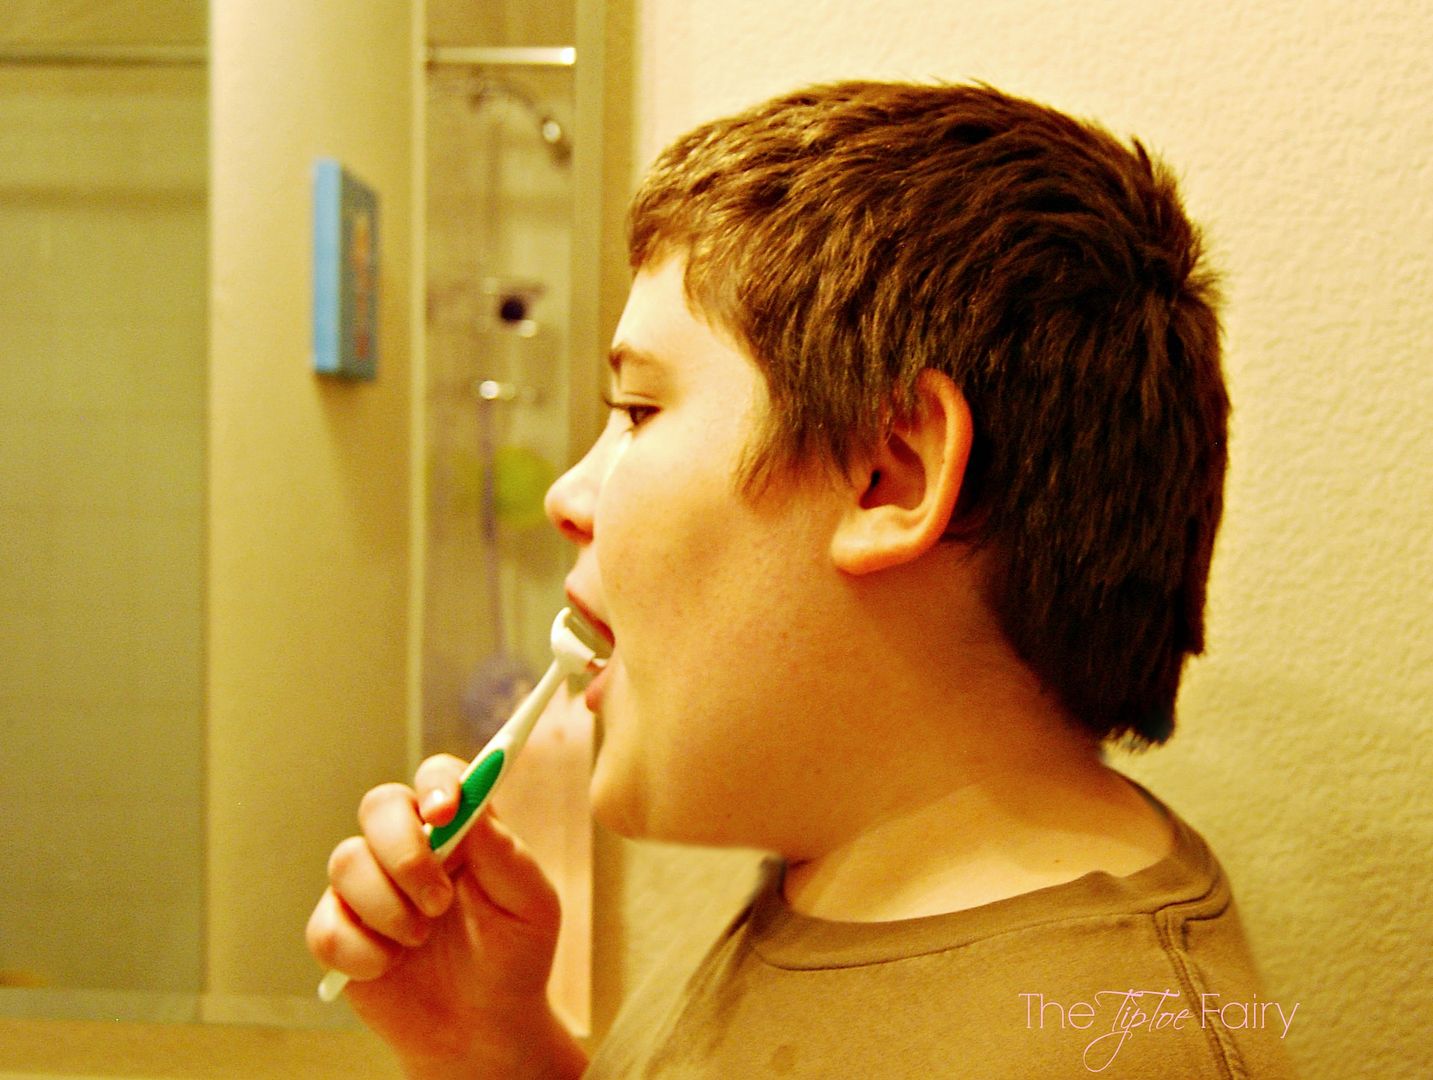 How we are learning to have better oral care with LISTERINE® products| The TipToe Fairy #sponsored #MC #oralcare #dentalcare #flossing